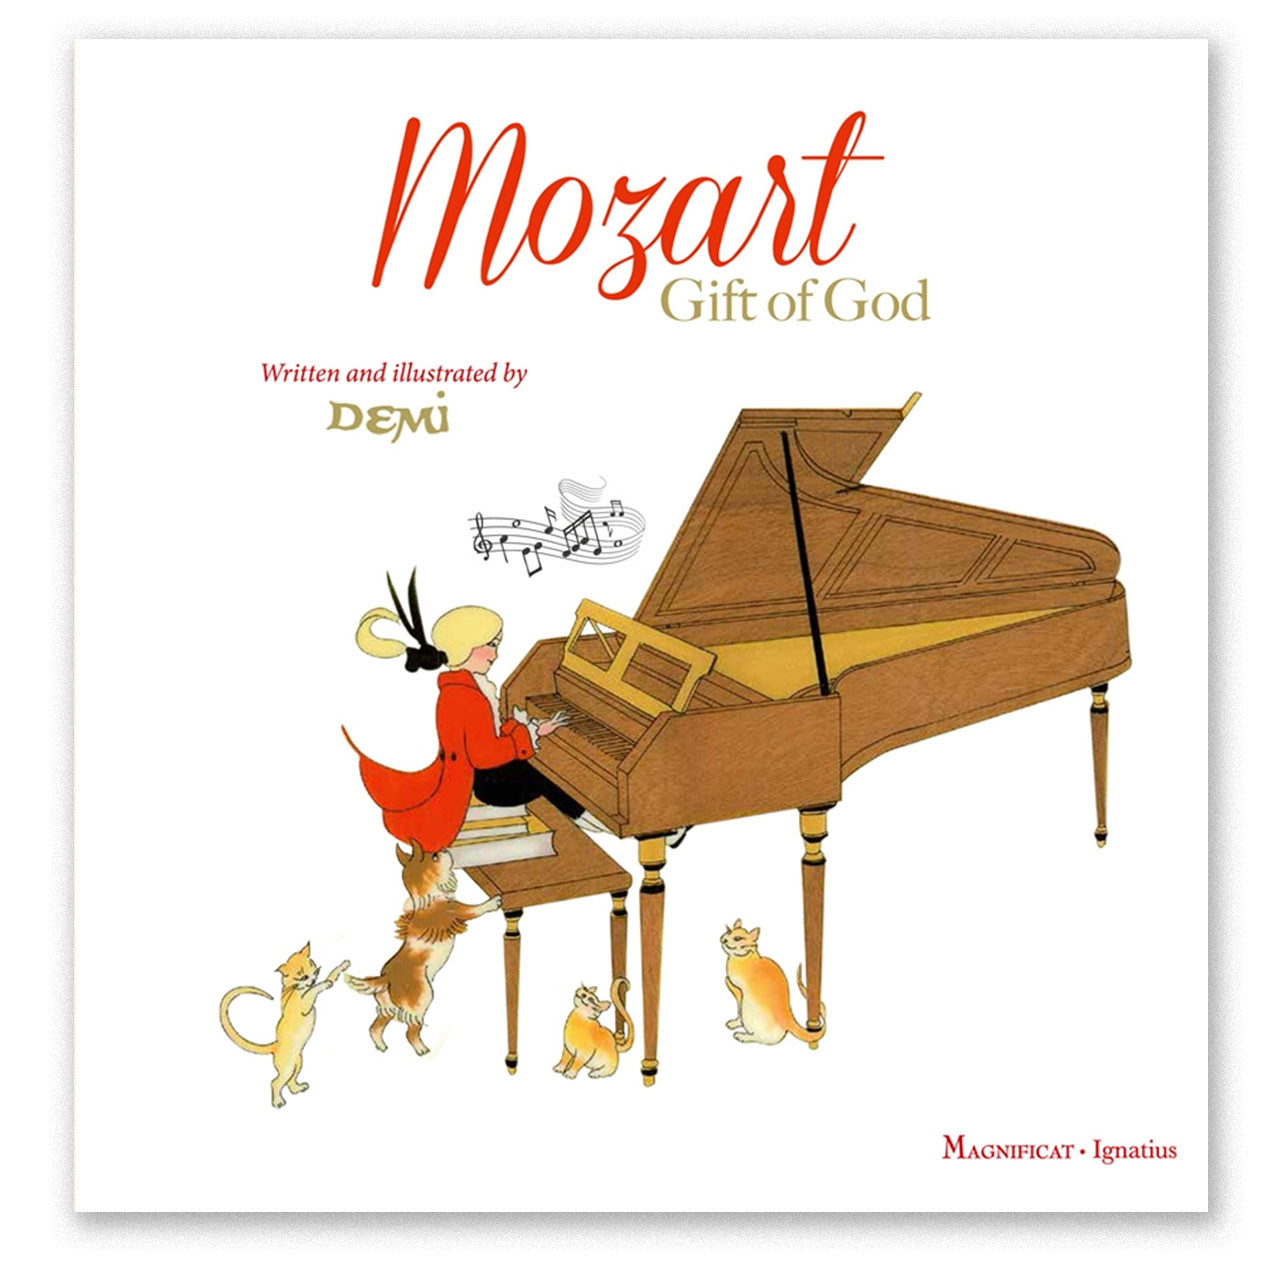 Mozart - Gift of God a hardcover children's book